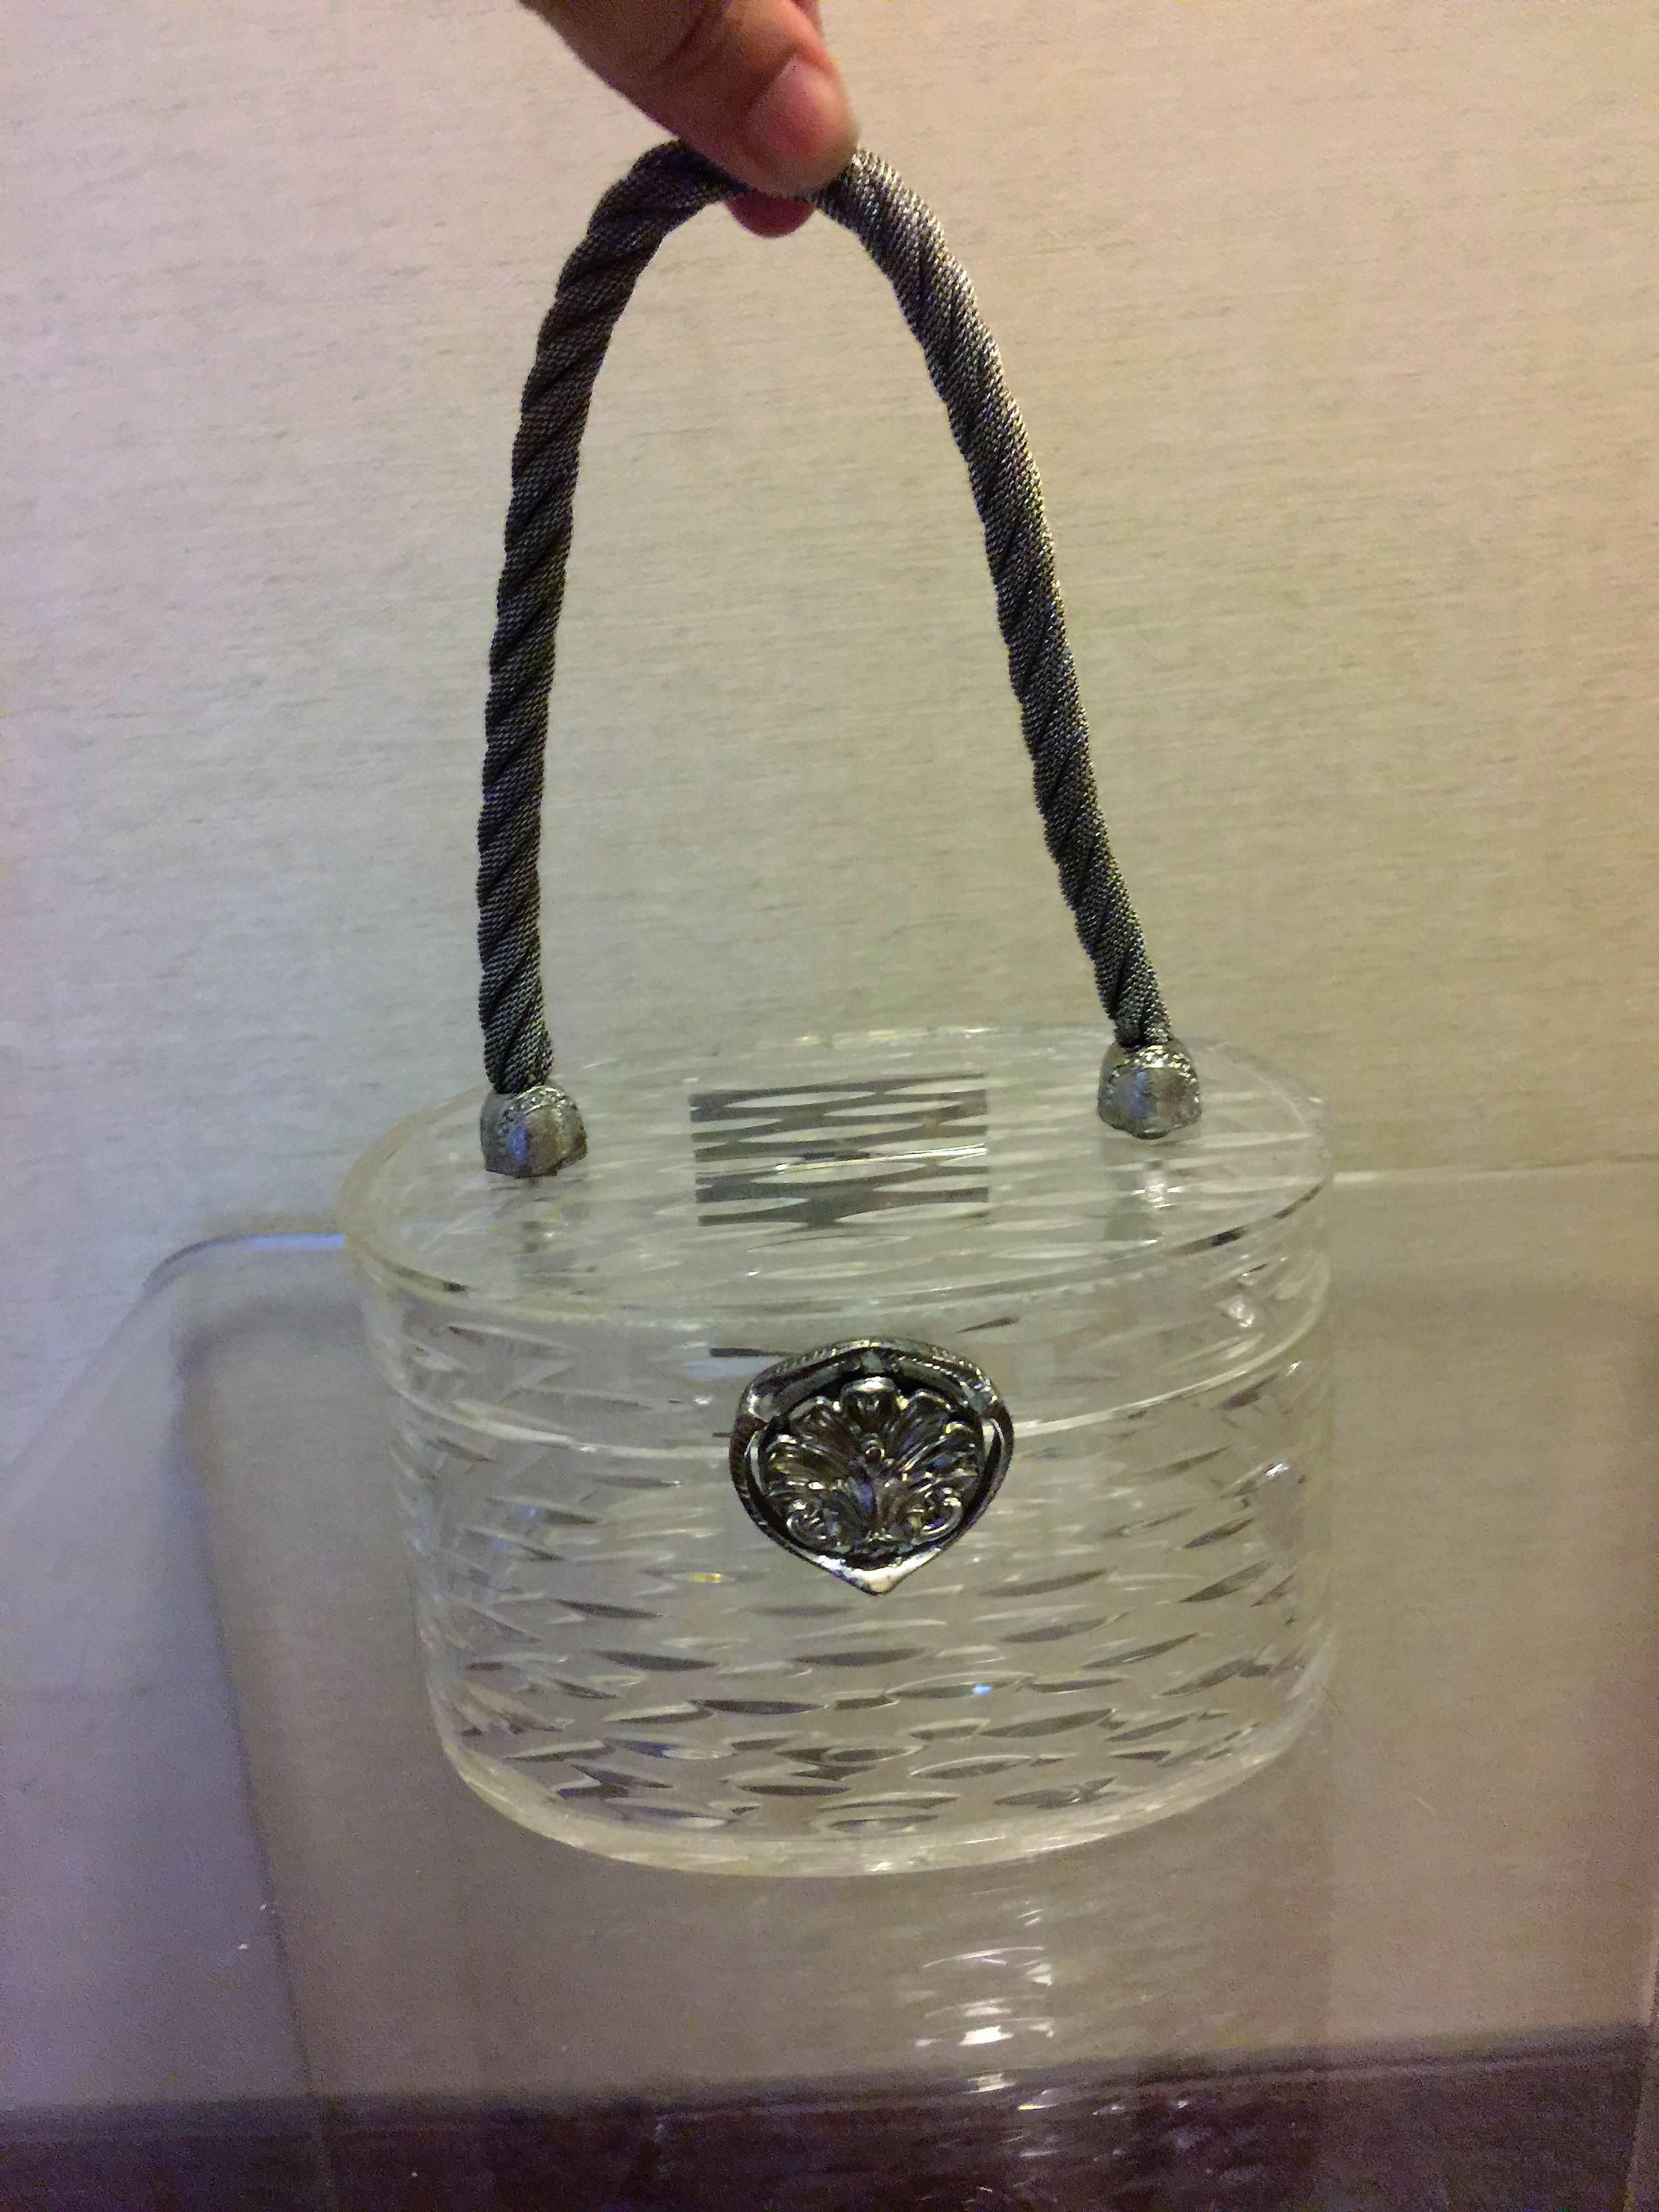 Beautiful and Petite Clear Carved Oblong Shaped Lucite Handbag designed by Wilardy.Perfect for an Evening Out.In Perfect Condition signed Wilardy on the Inner Chrome Hinge.The Measurements of the Handbag without the Handle are 3 1/2